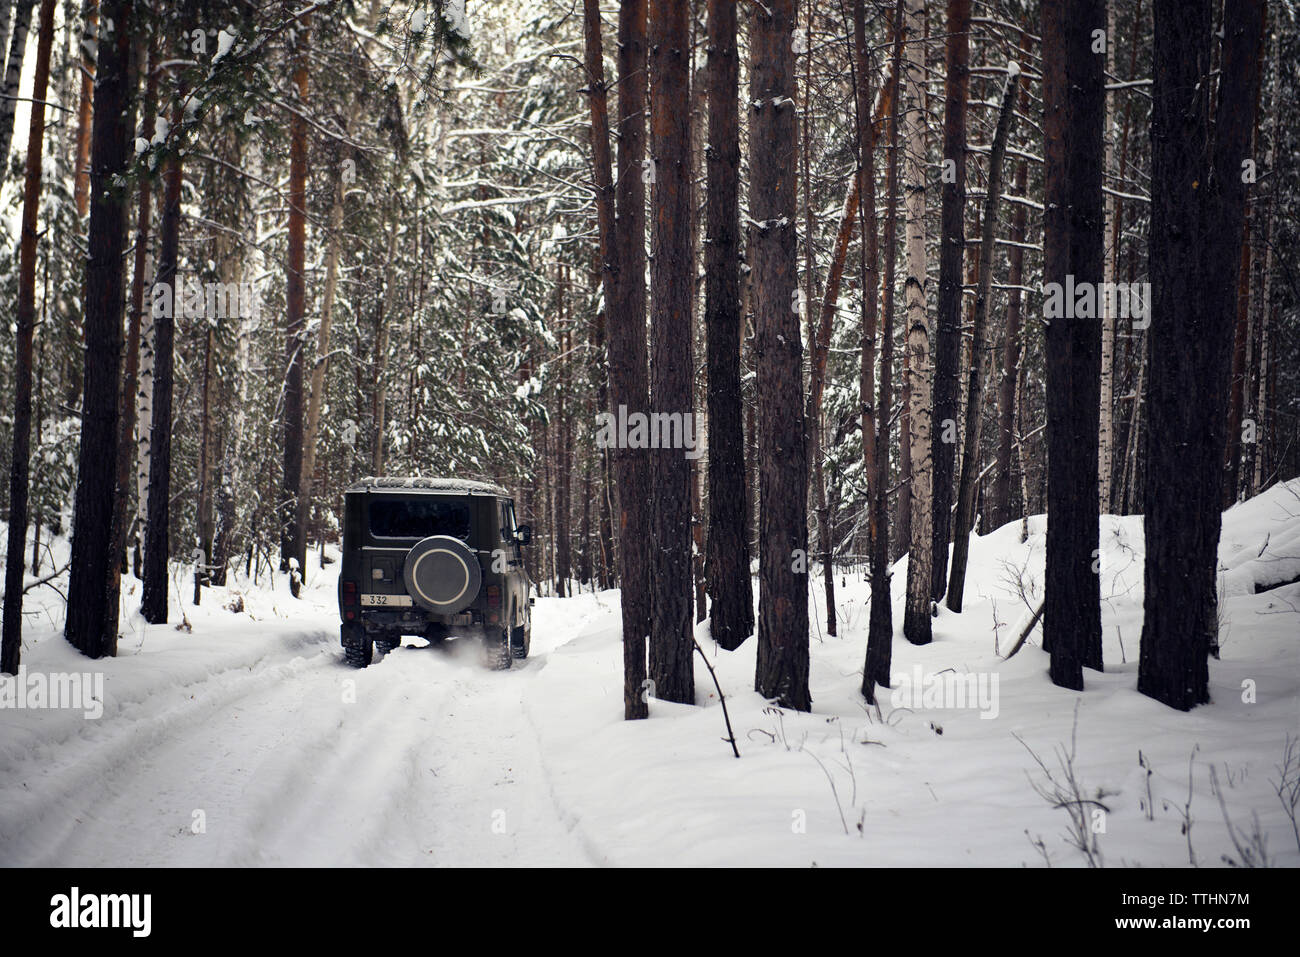 Off-road vehicle in snow covered forest Stock Photo